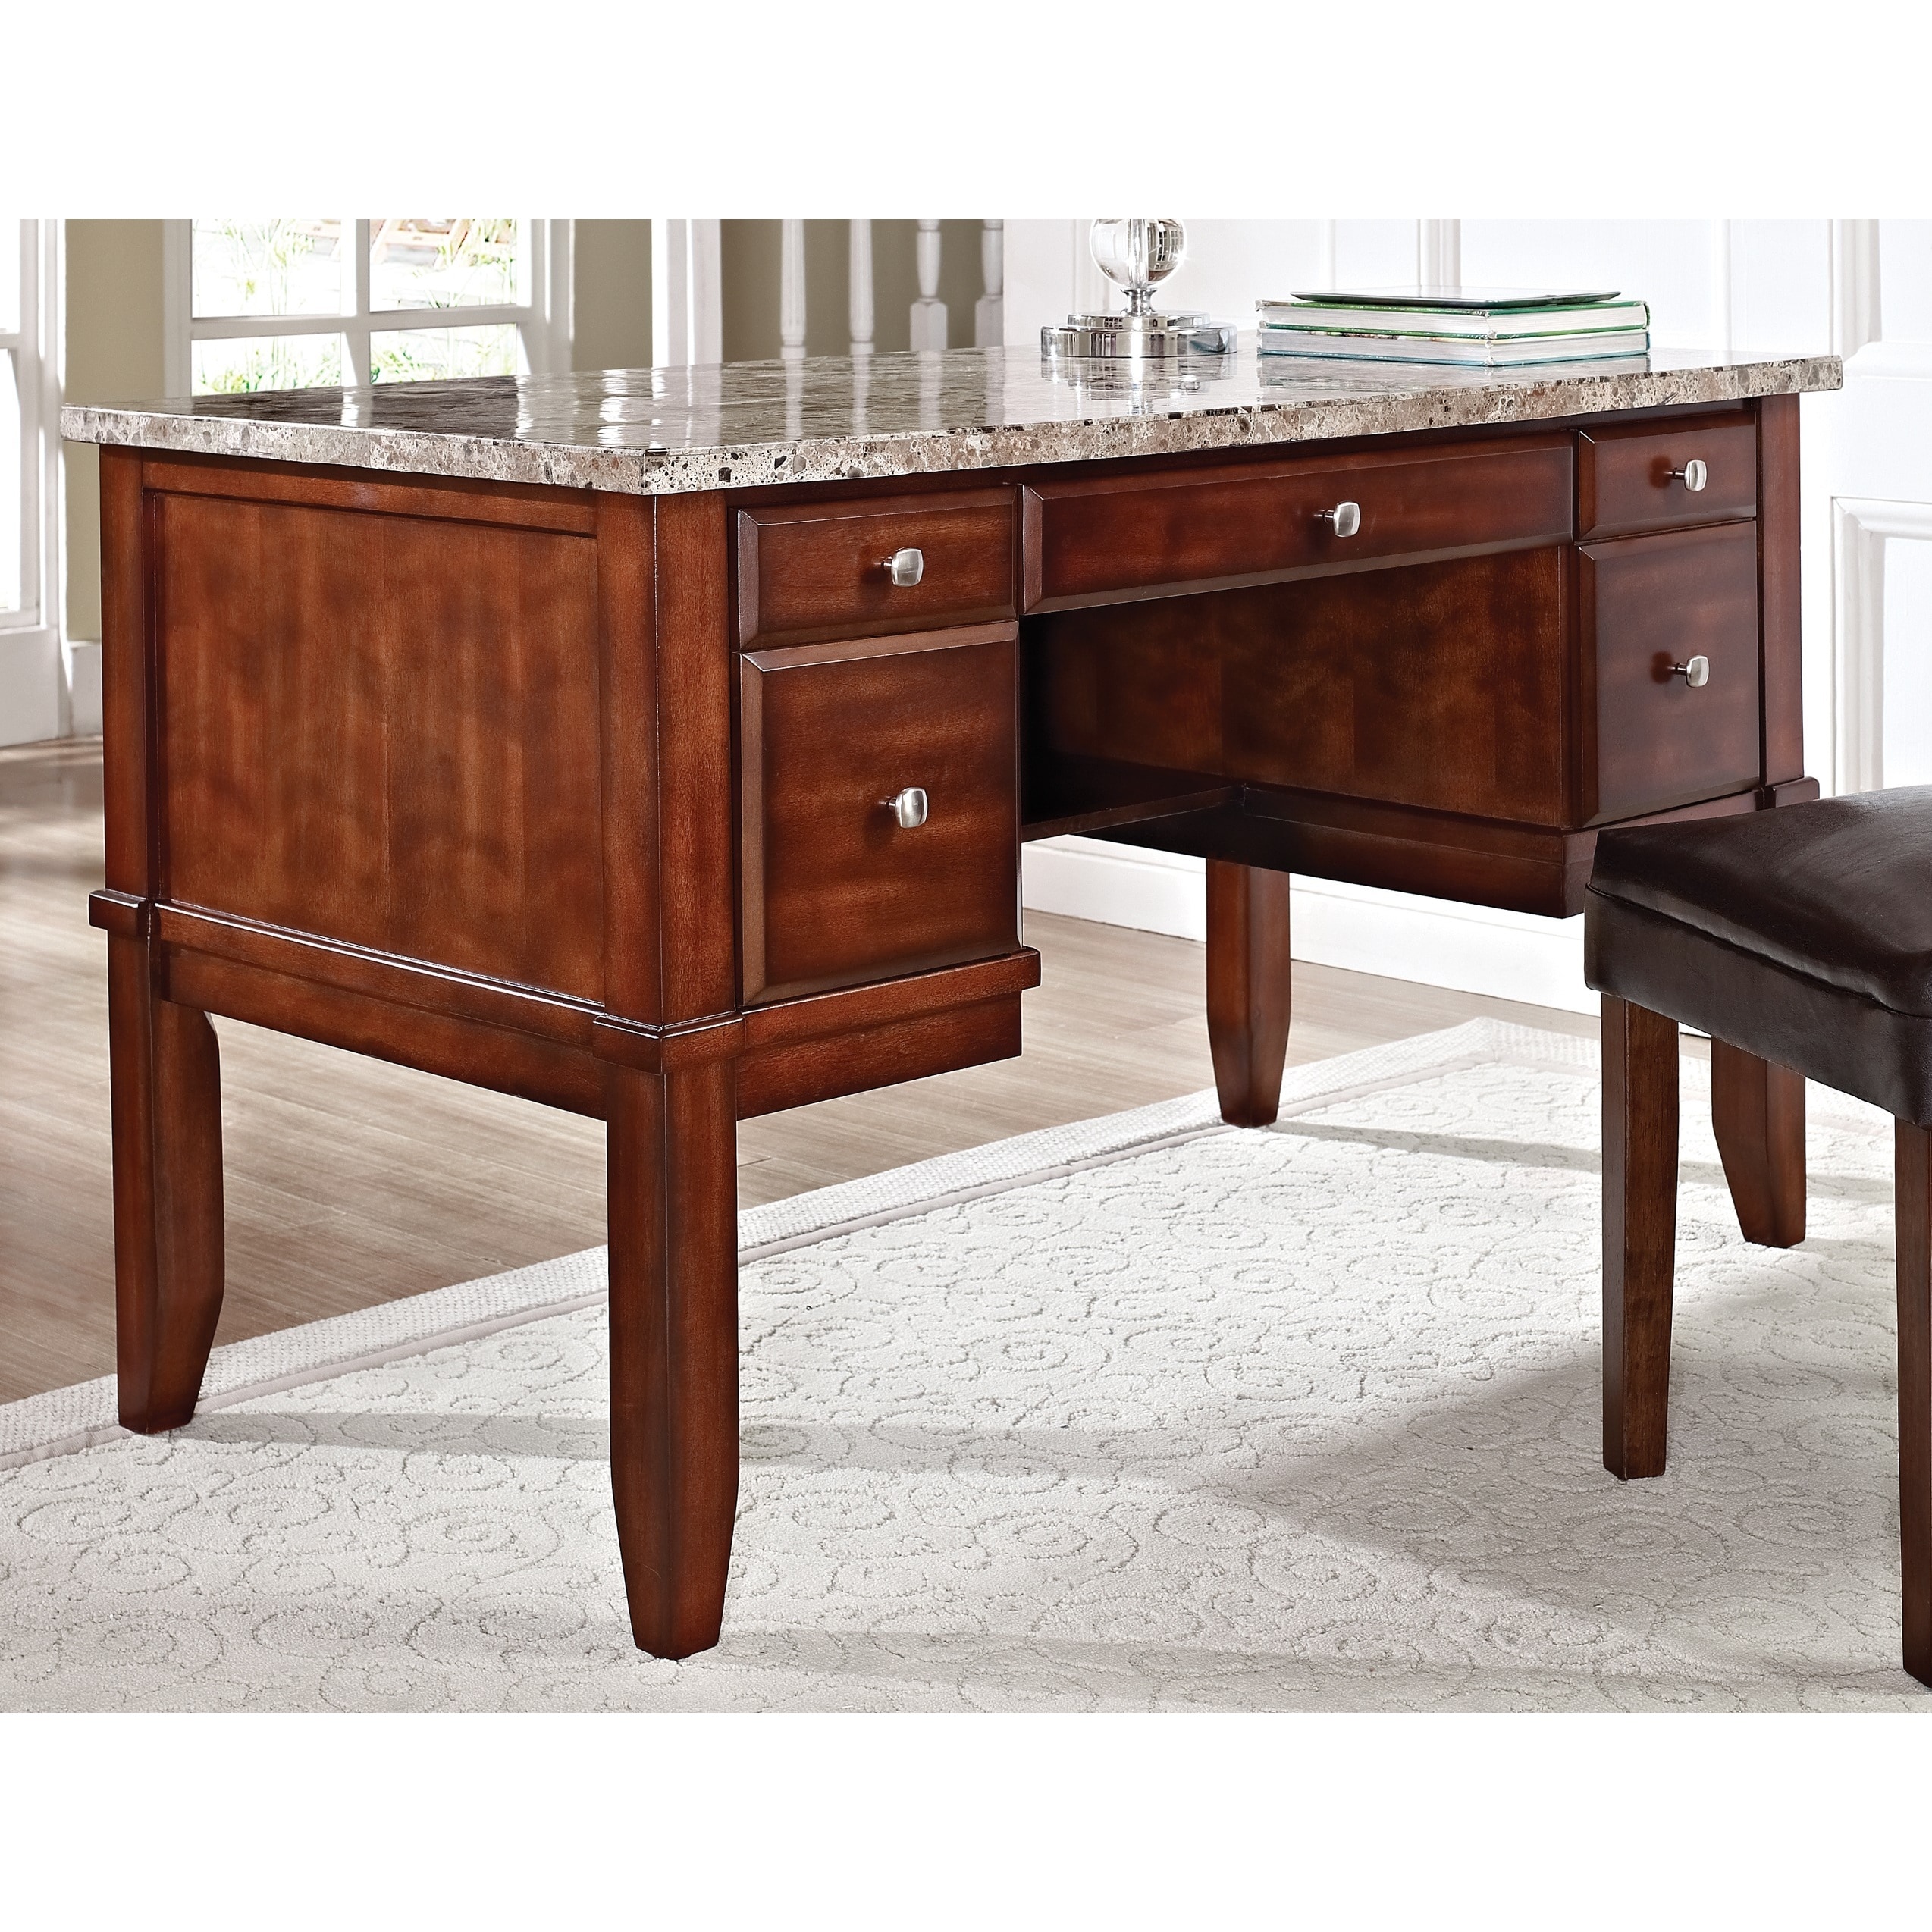 Melbourne Spanish Marble Top Desk By Greyson Living Overstock 9249129